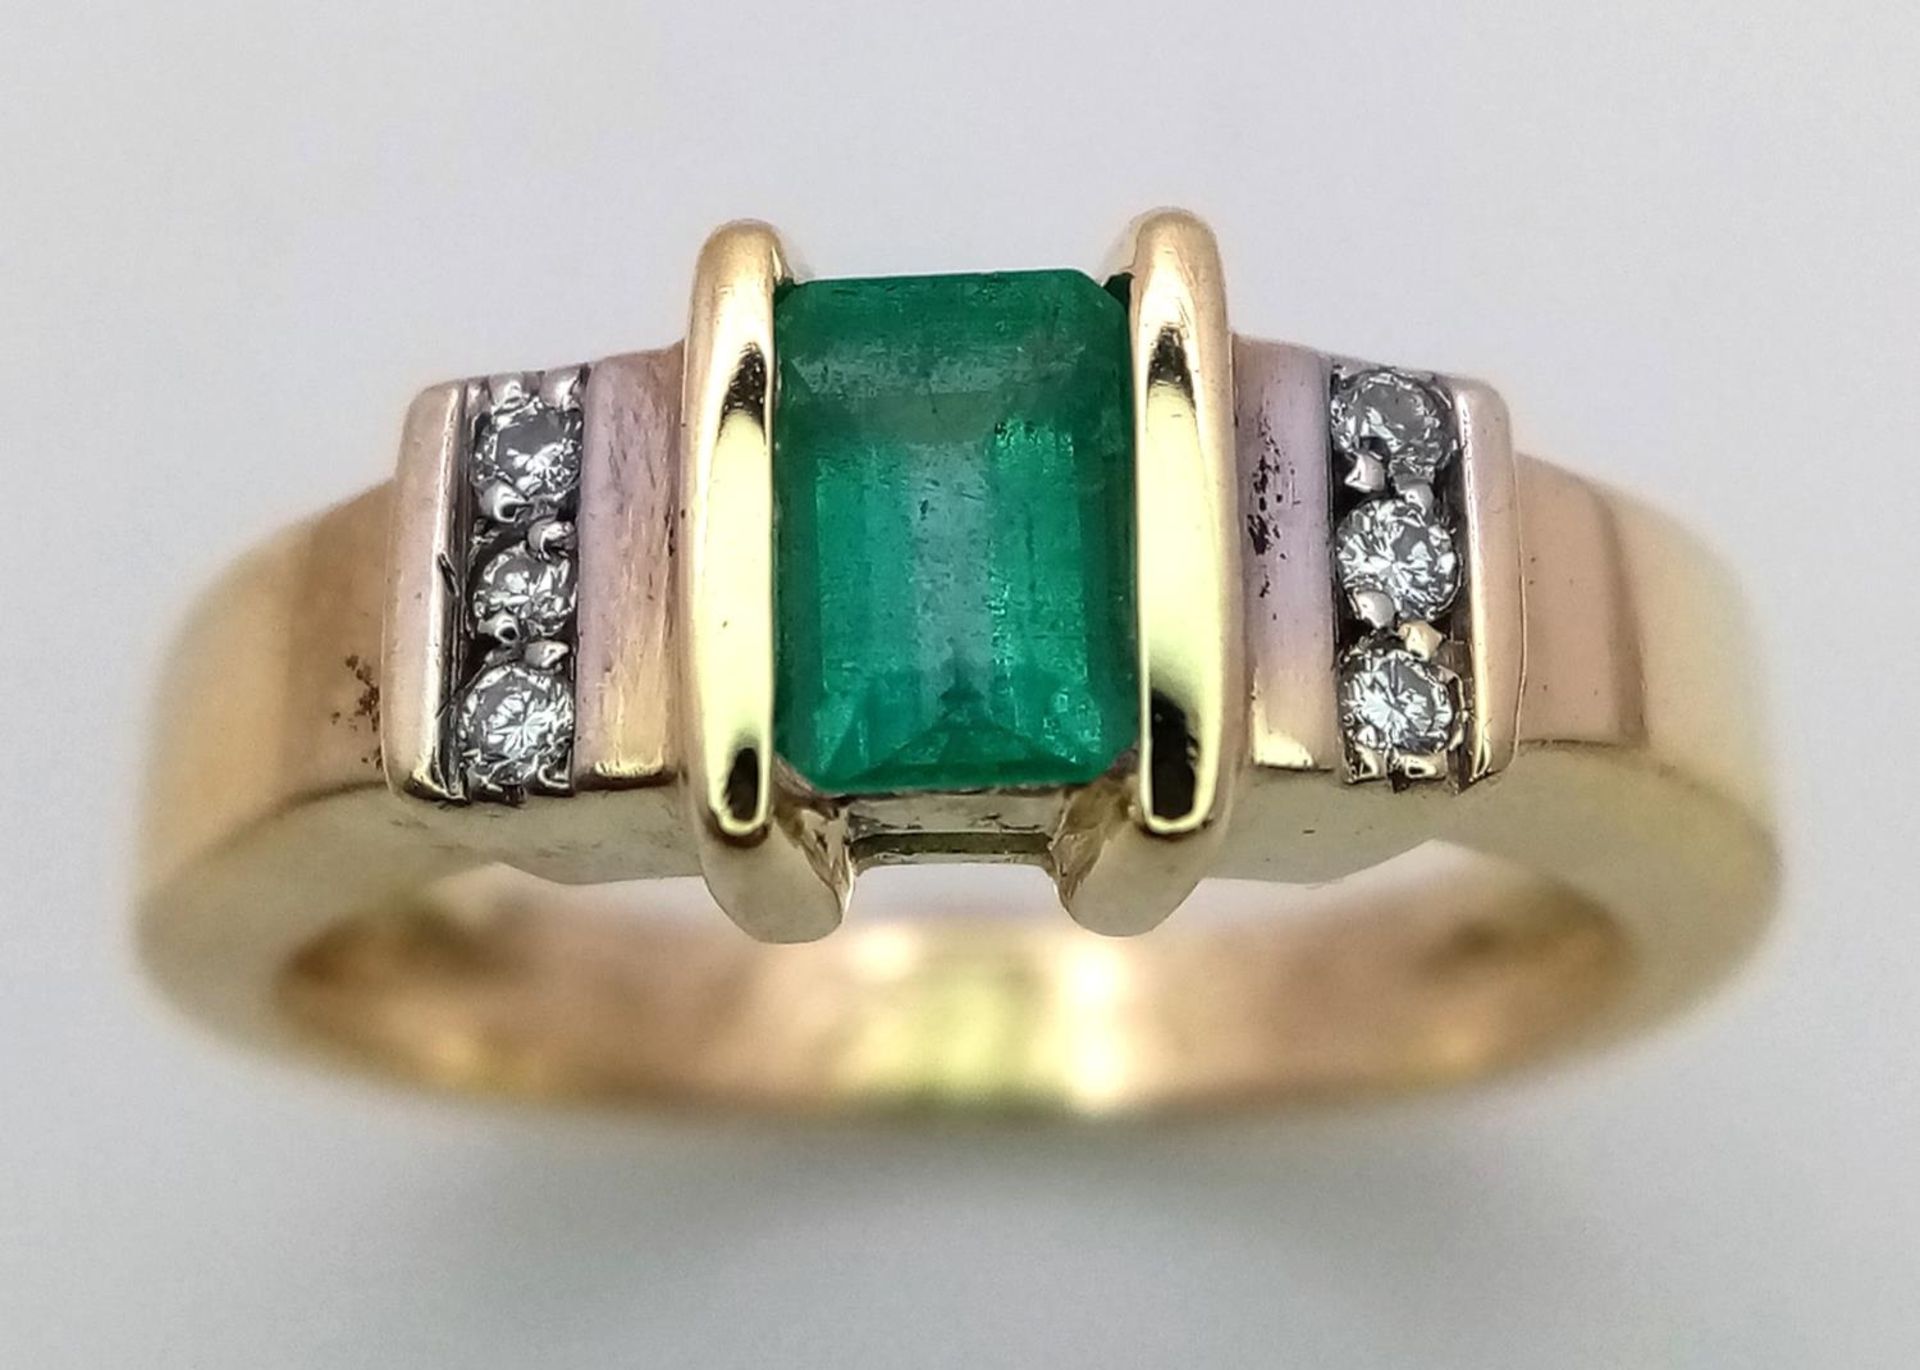 AN 18K (TESTED) YELLOW GOLD DIAMOND & EMERALD RING. Size N, 5.8g total weight. Ref: SC 9044 - Image 3 of 5